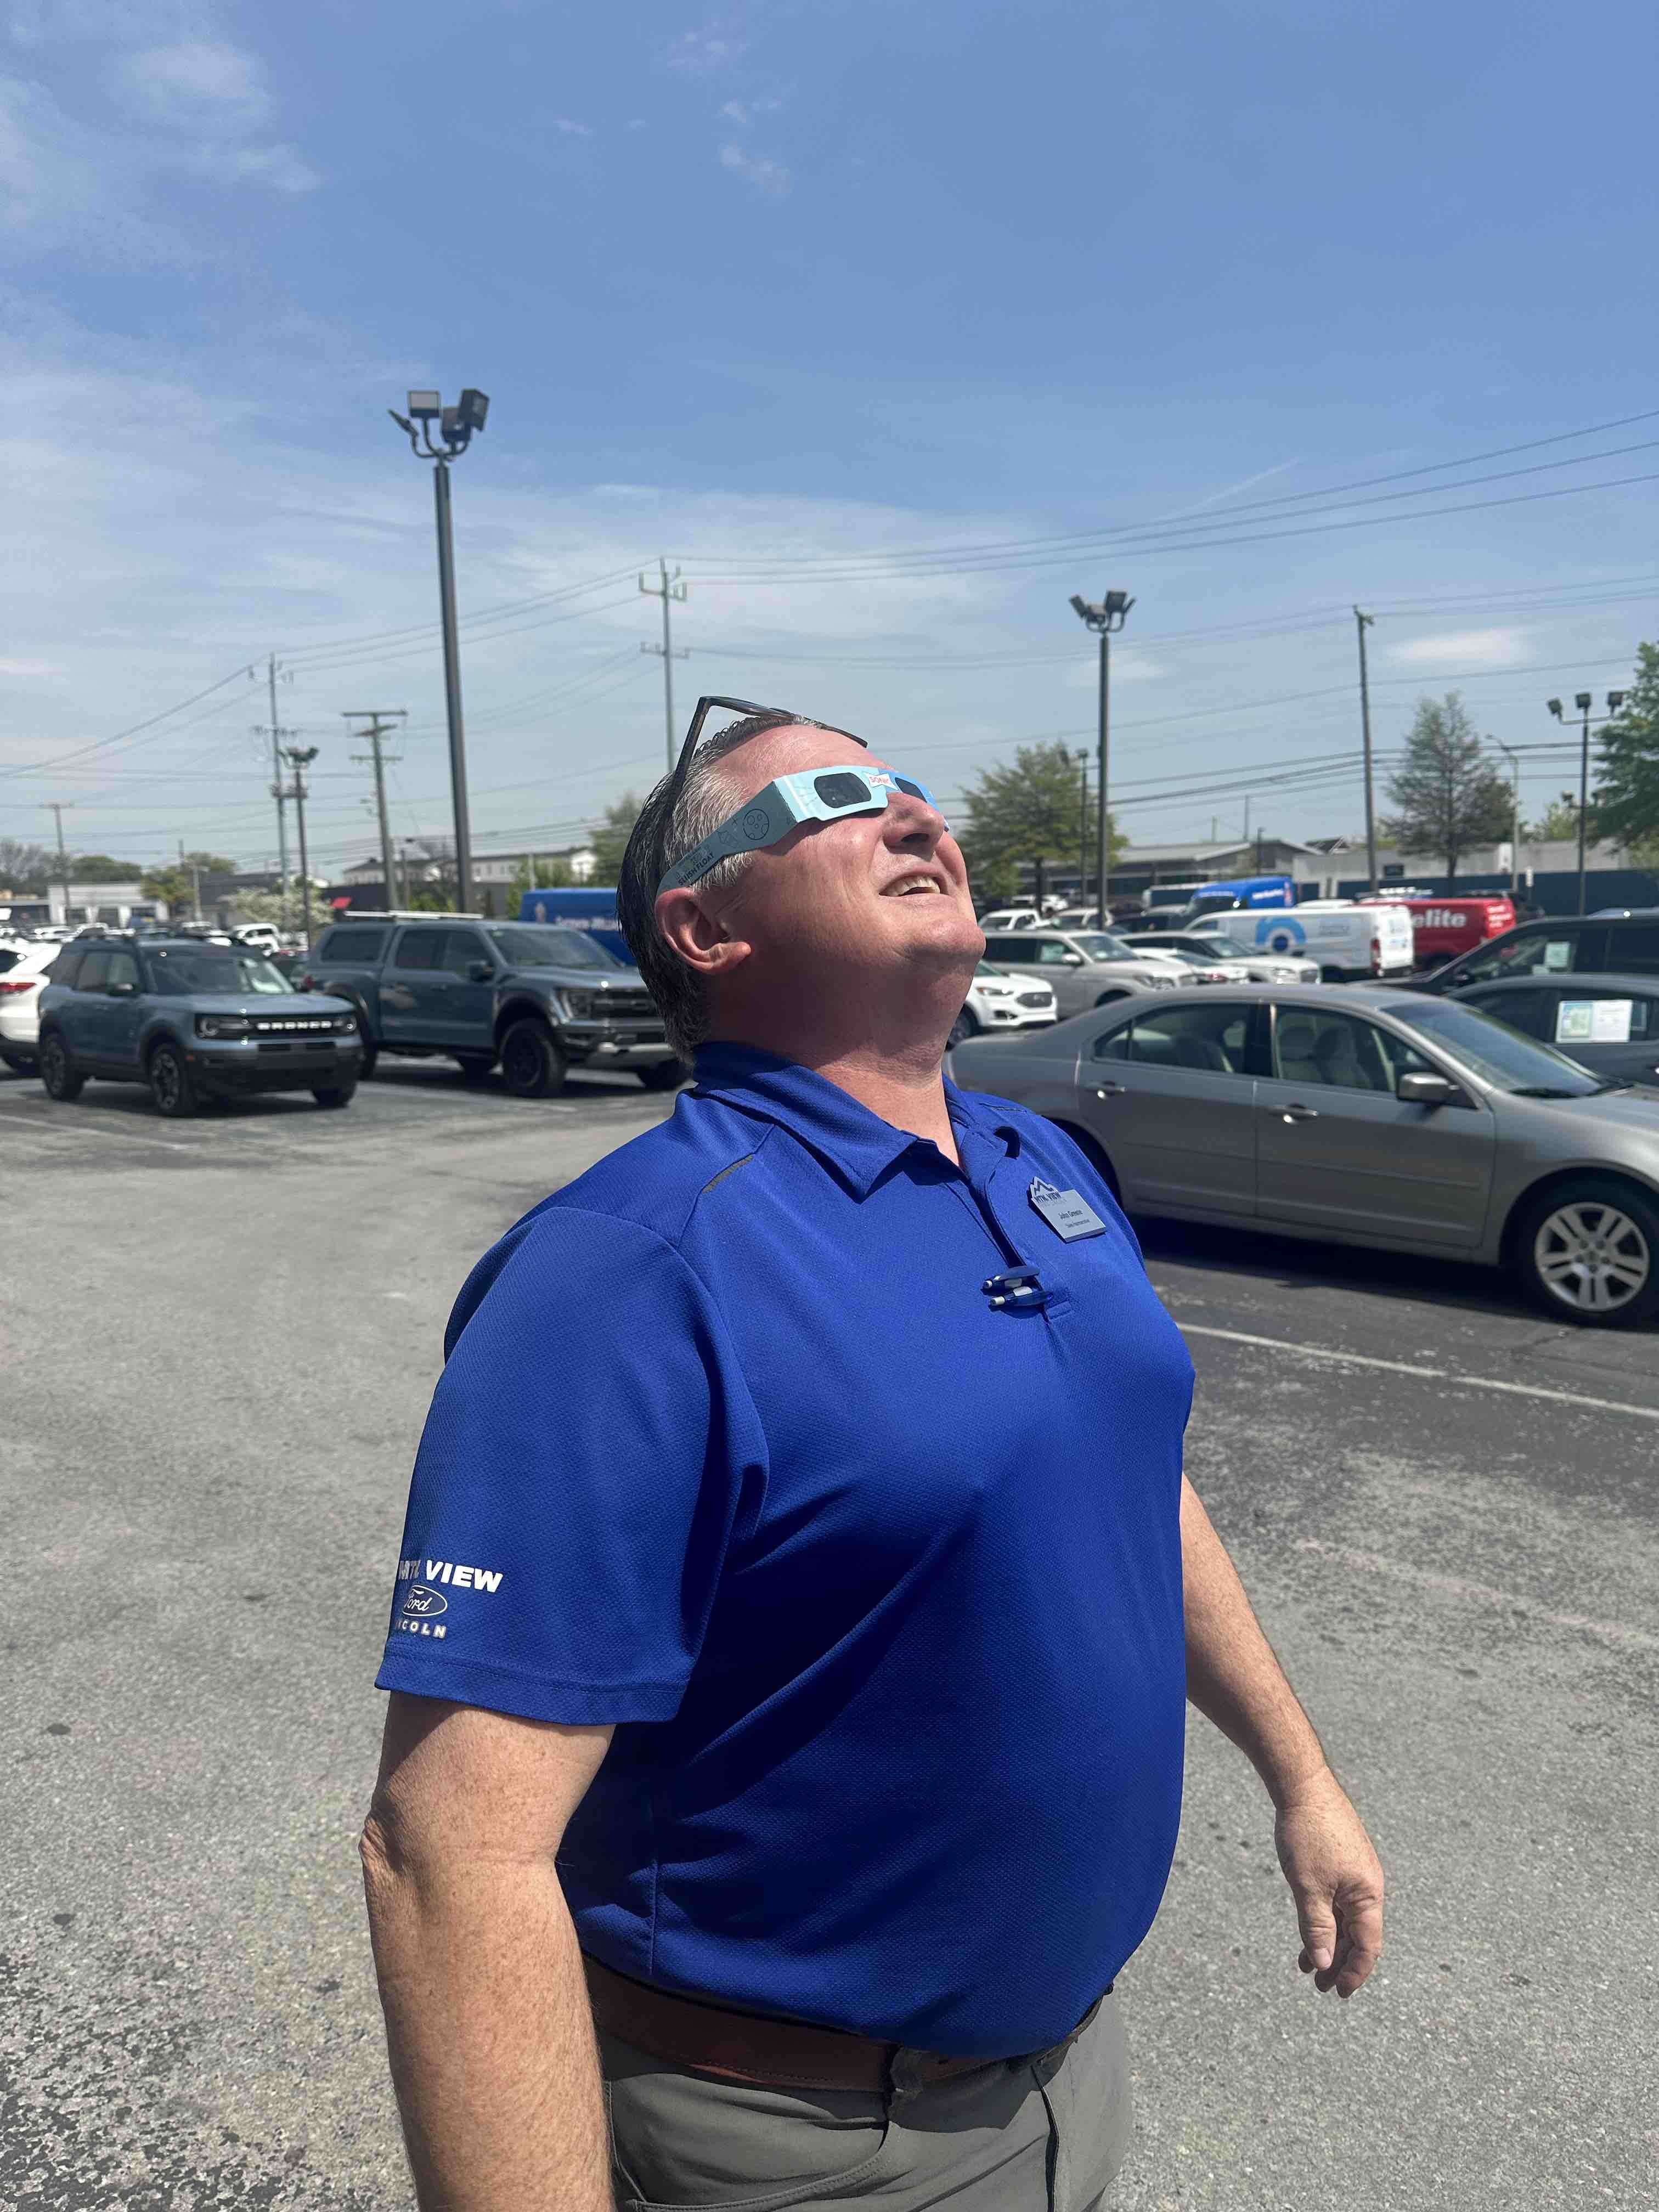 Bogue Of The Year Blinds Himself Attempting To Watch The Solar Eclipse.